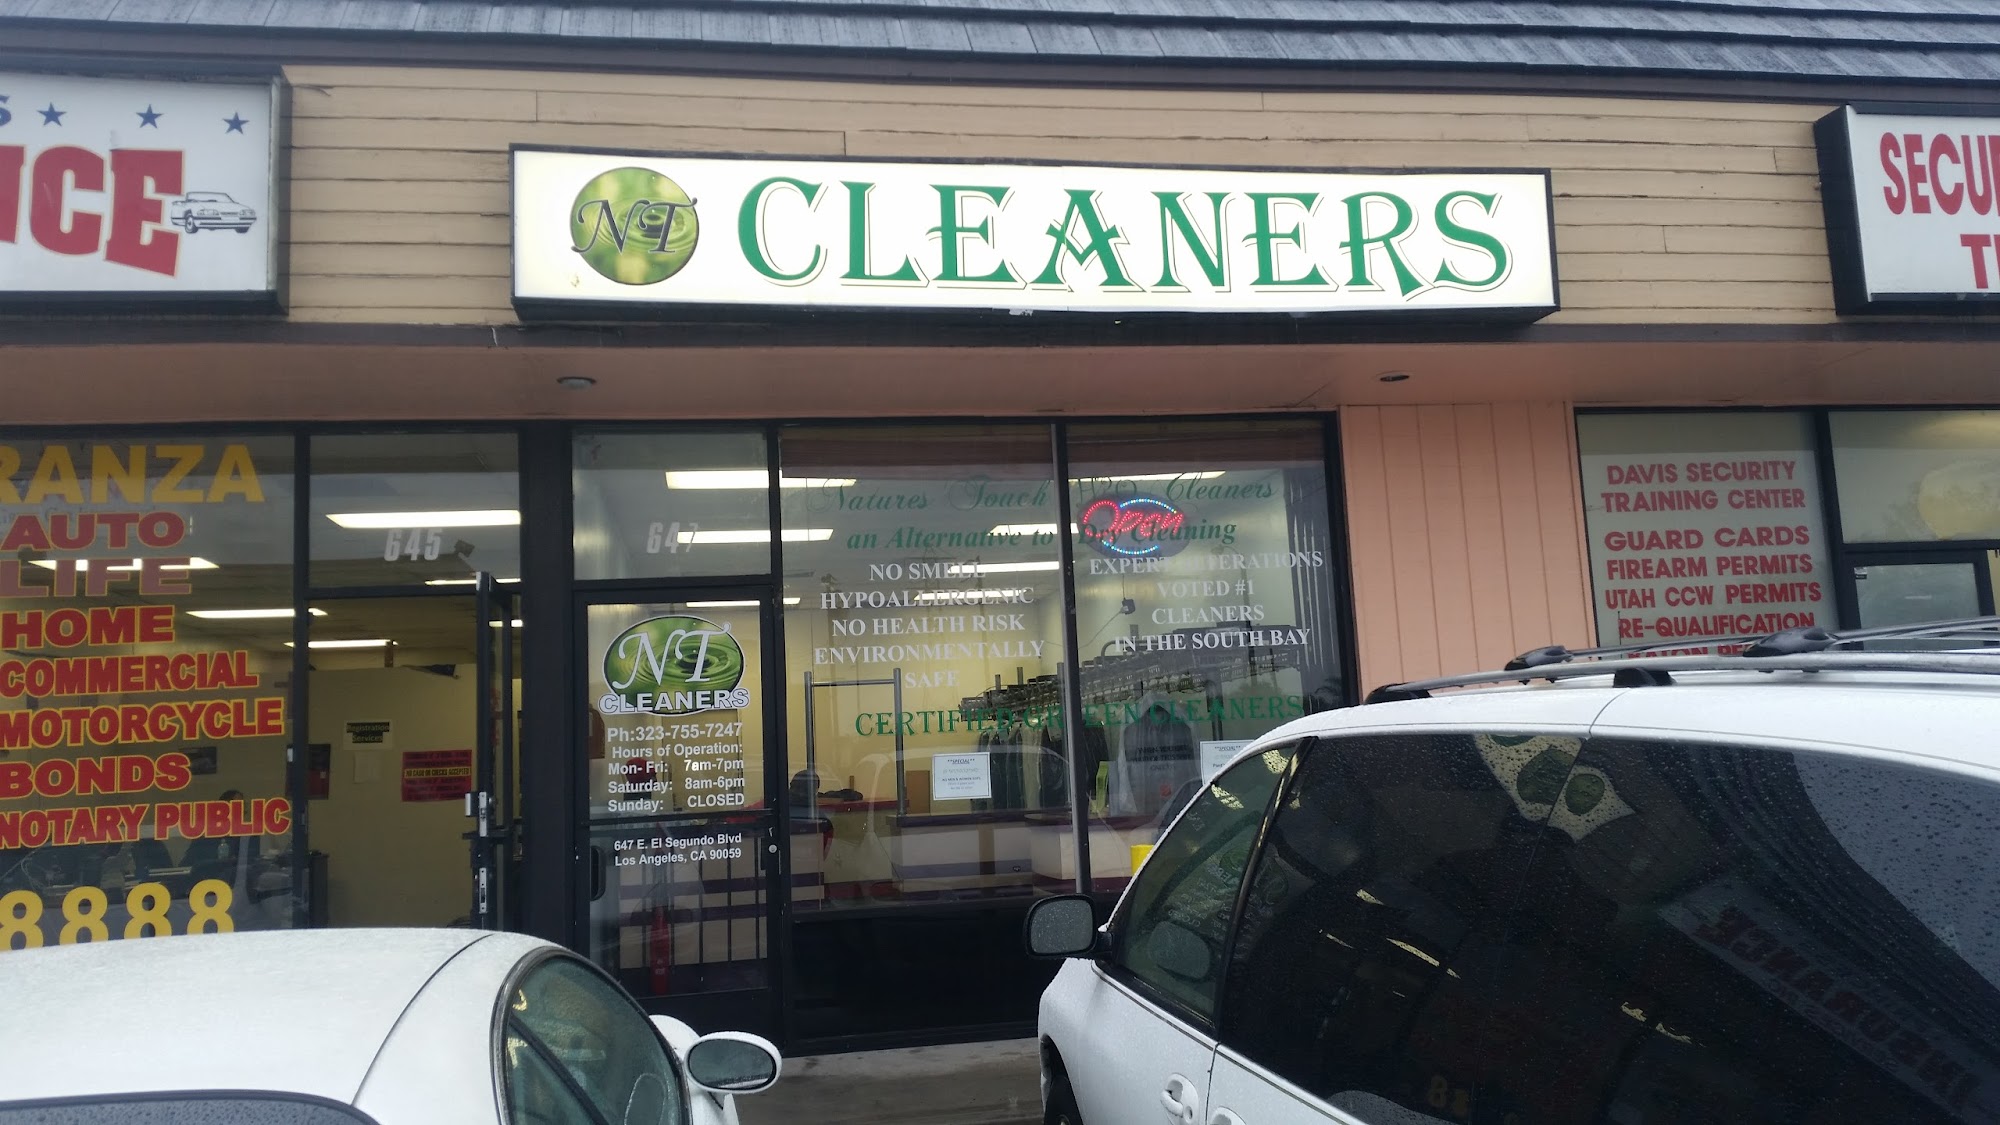 NT CLEANERS aka Nature's Touch H2O Cleaners